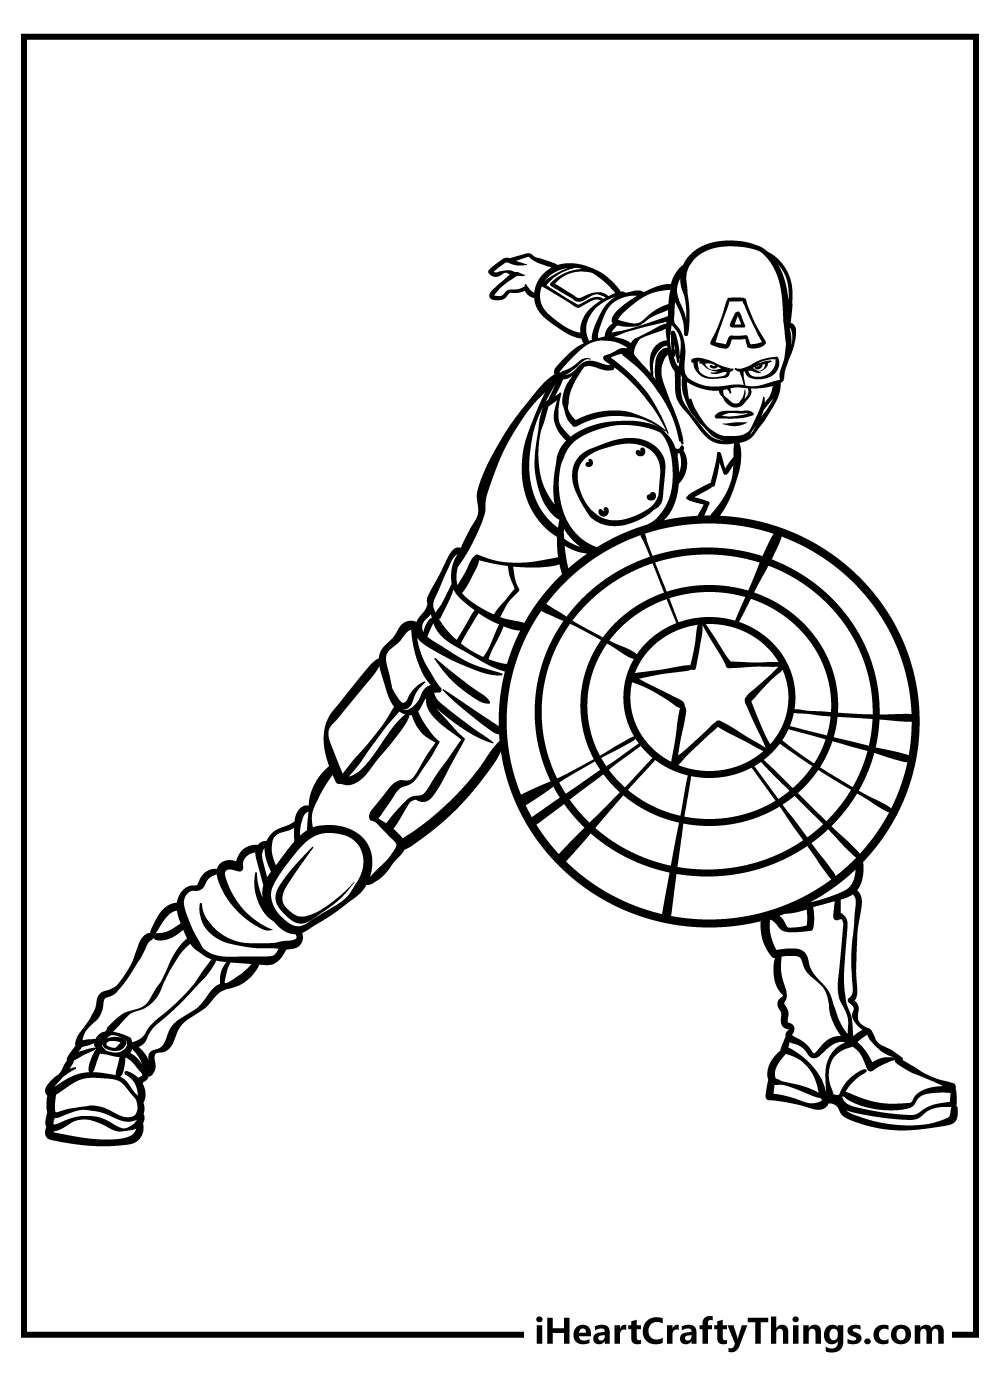 Avengers Coloring Pages free printable